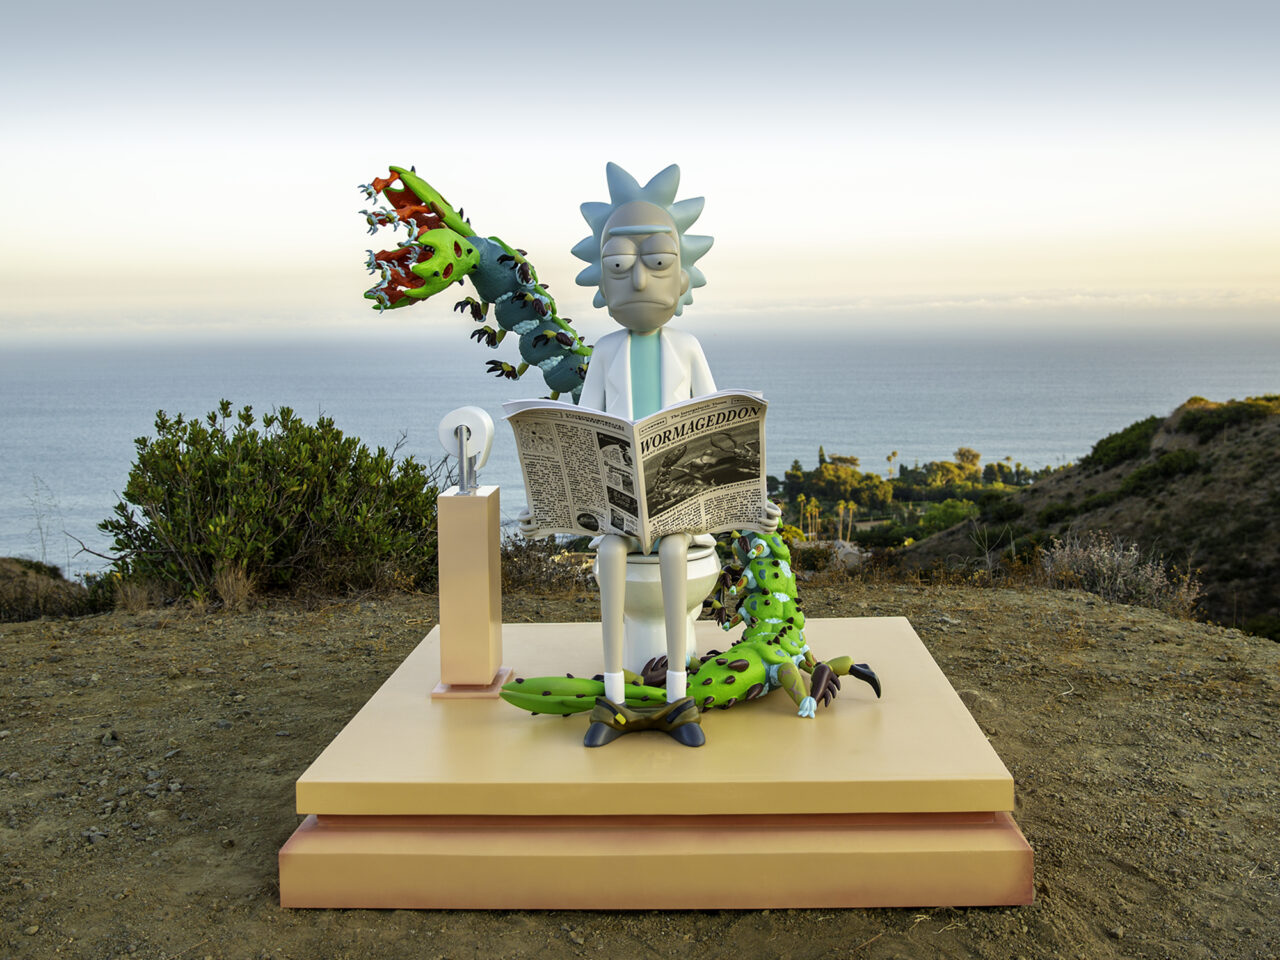 A sculpture of Rick and Morty character Rick Sanchez in Malibu, CA. The scene is part of the ongoing #WORMAGEDDON fan experience leading to the global release of Adult Swim’s Rick and Morty season six starting September 4, 2022. (Courtesy Adult Swim)